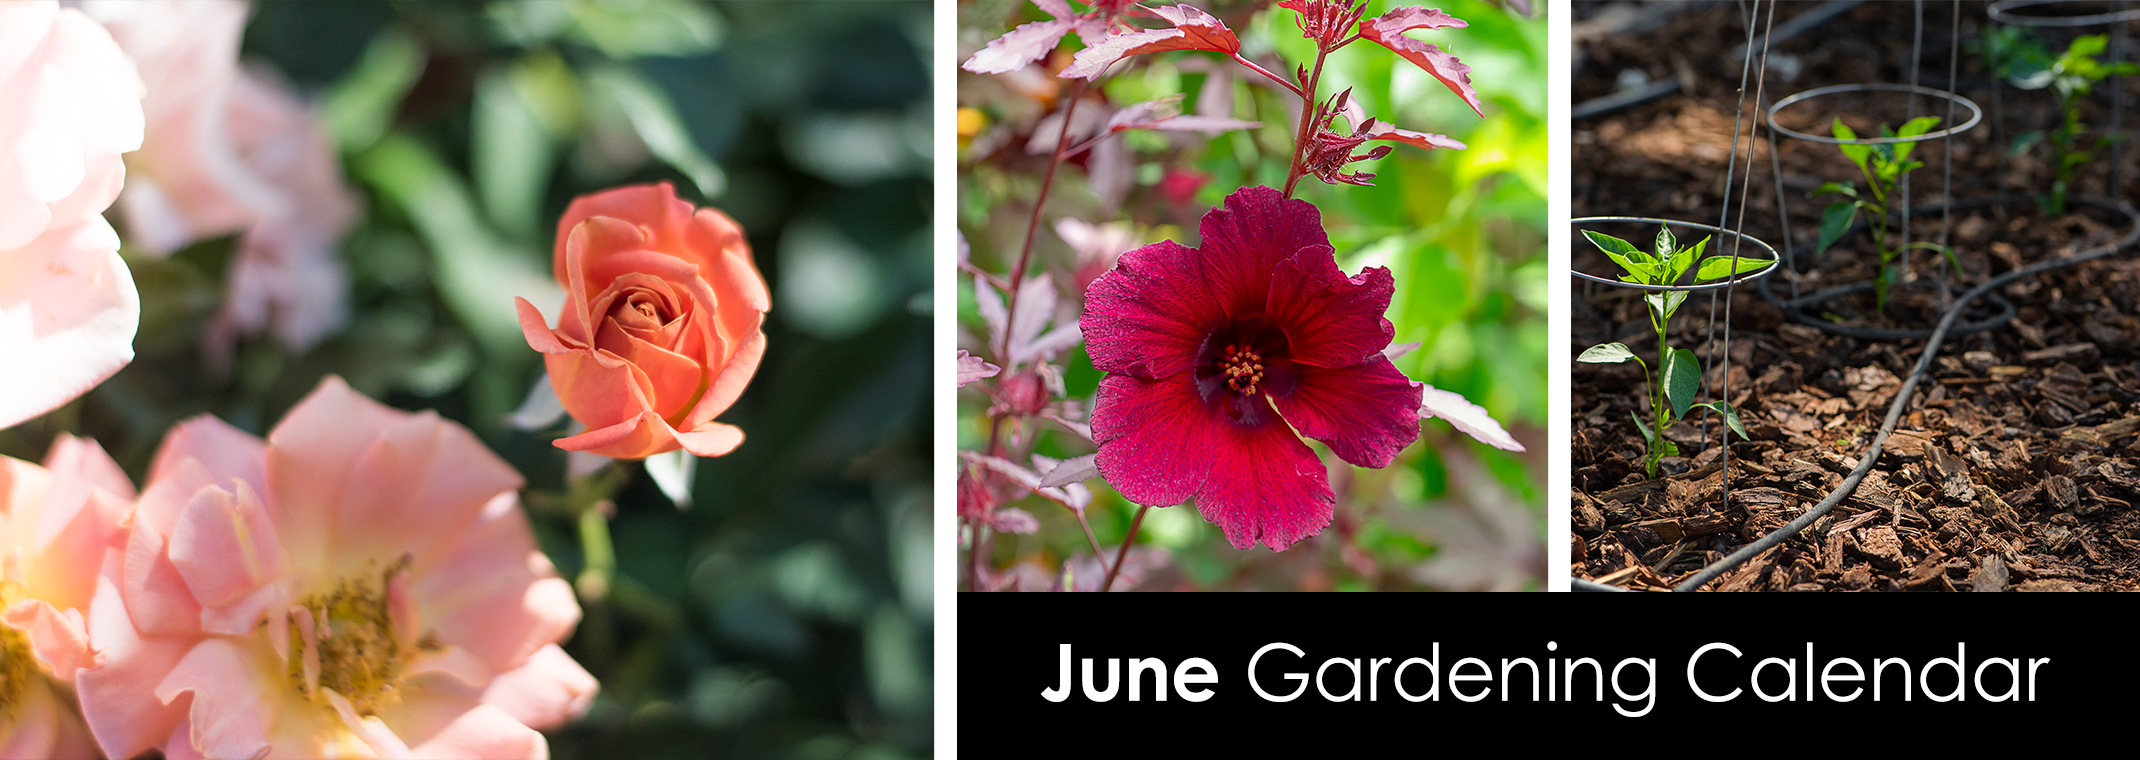 Salmon-color roses, a deep pink hibiscus bloom, pepper plants in garden with mulch and drip system.